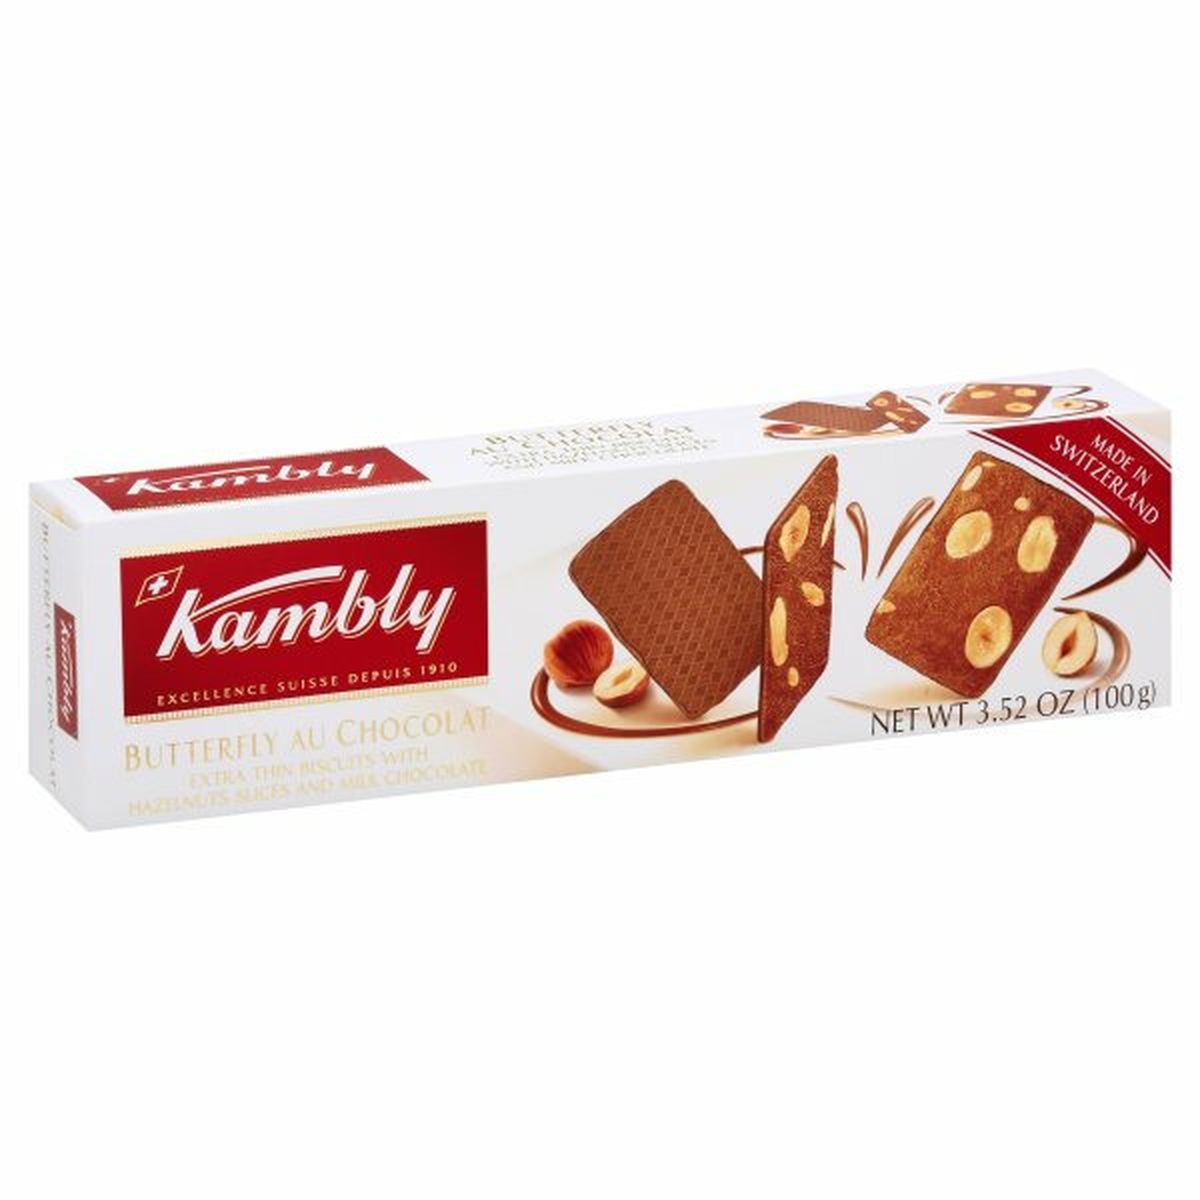 Calories in Kambly Butterfly Au Chocolat